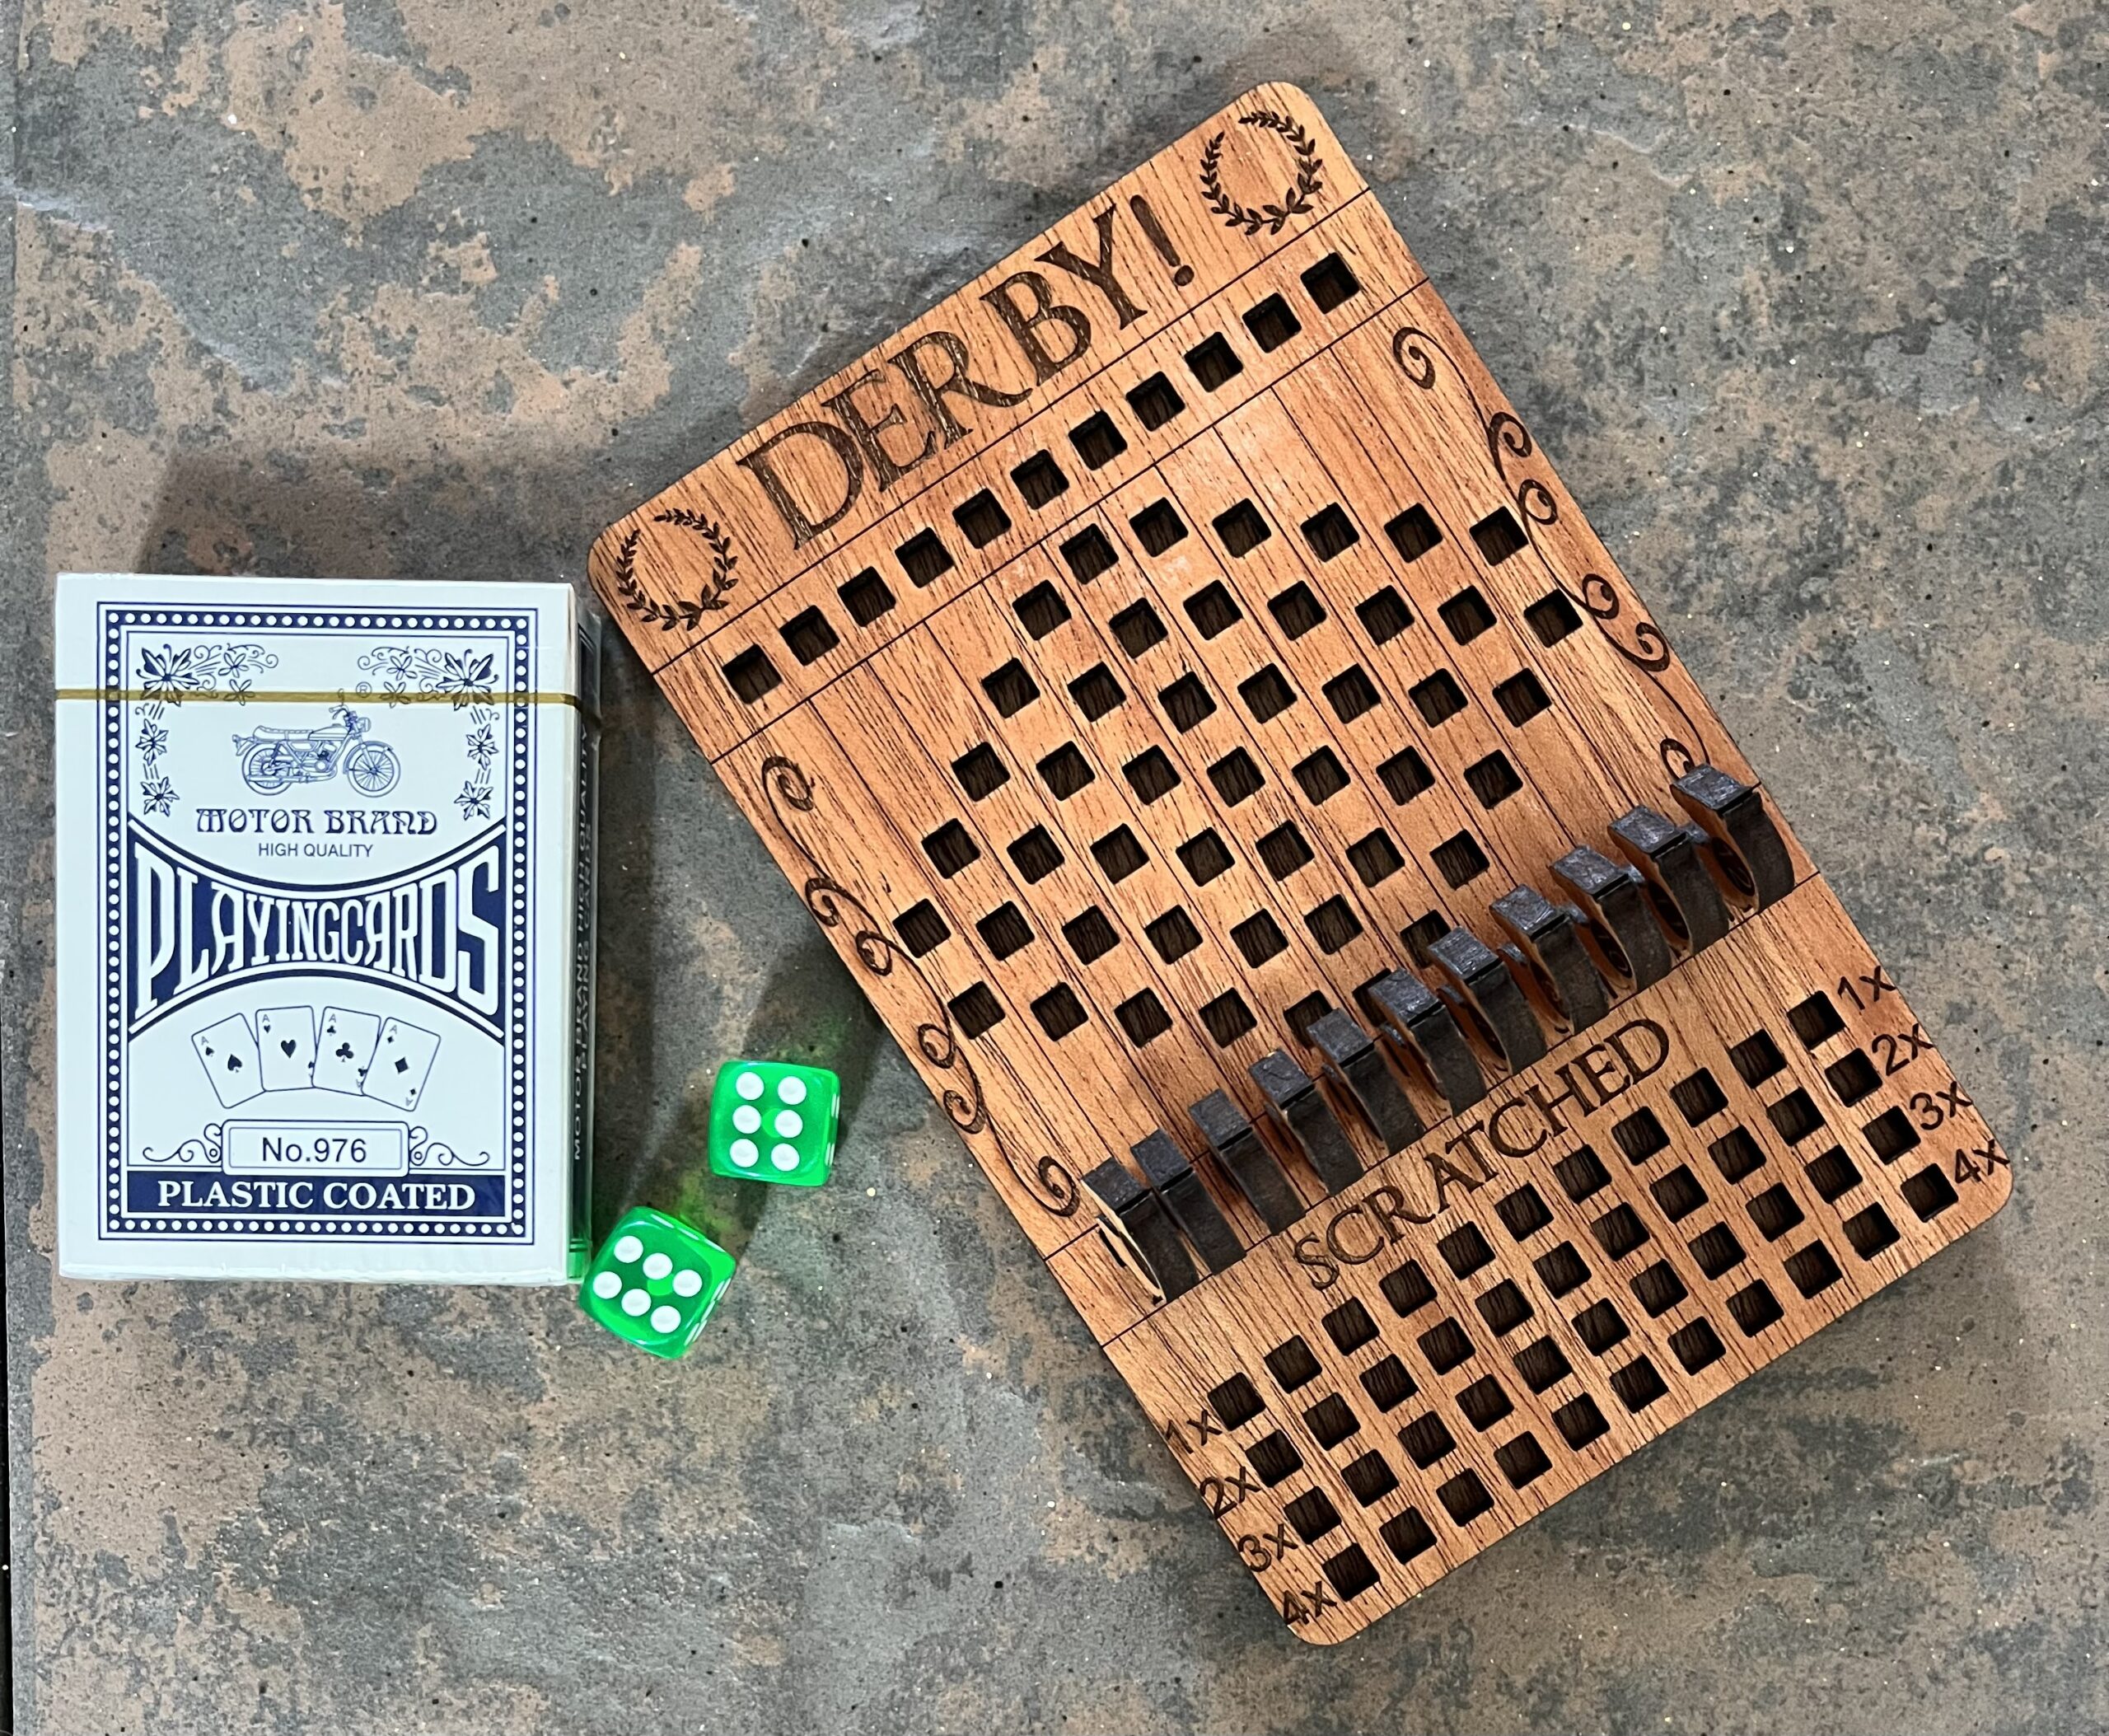 Derby! A Horse Racing Dice Game